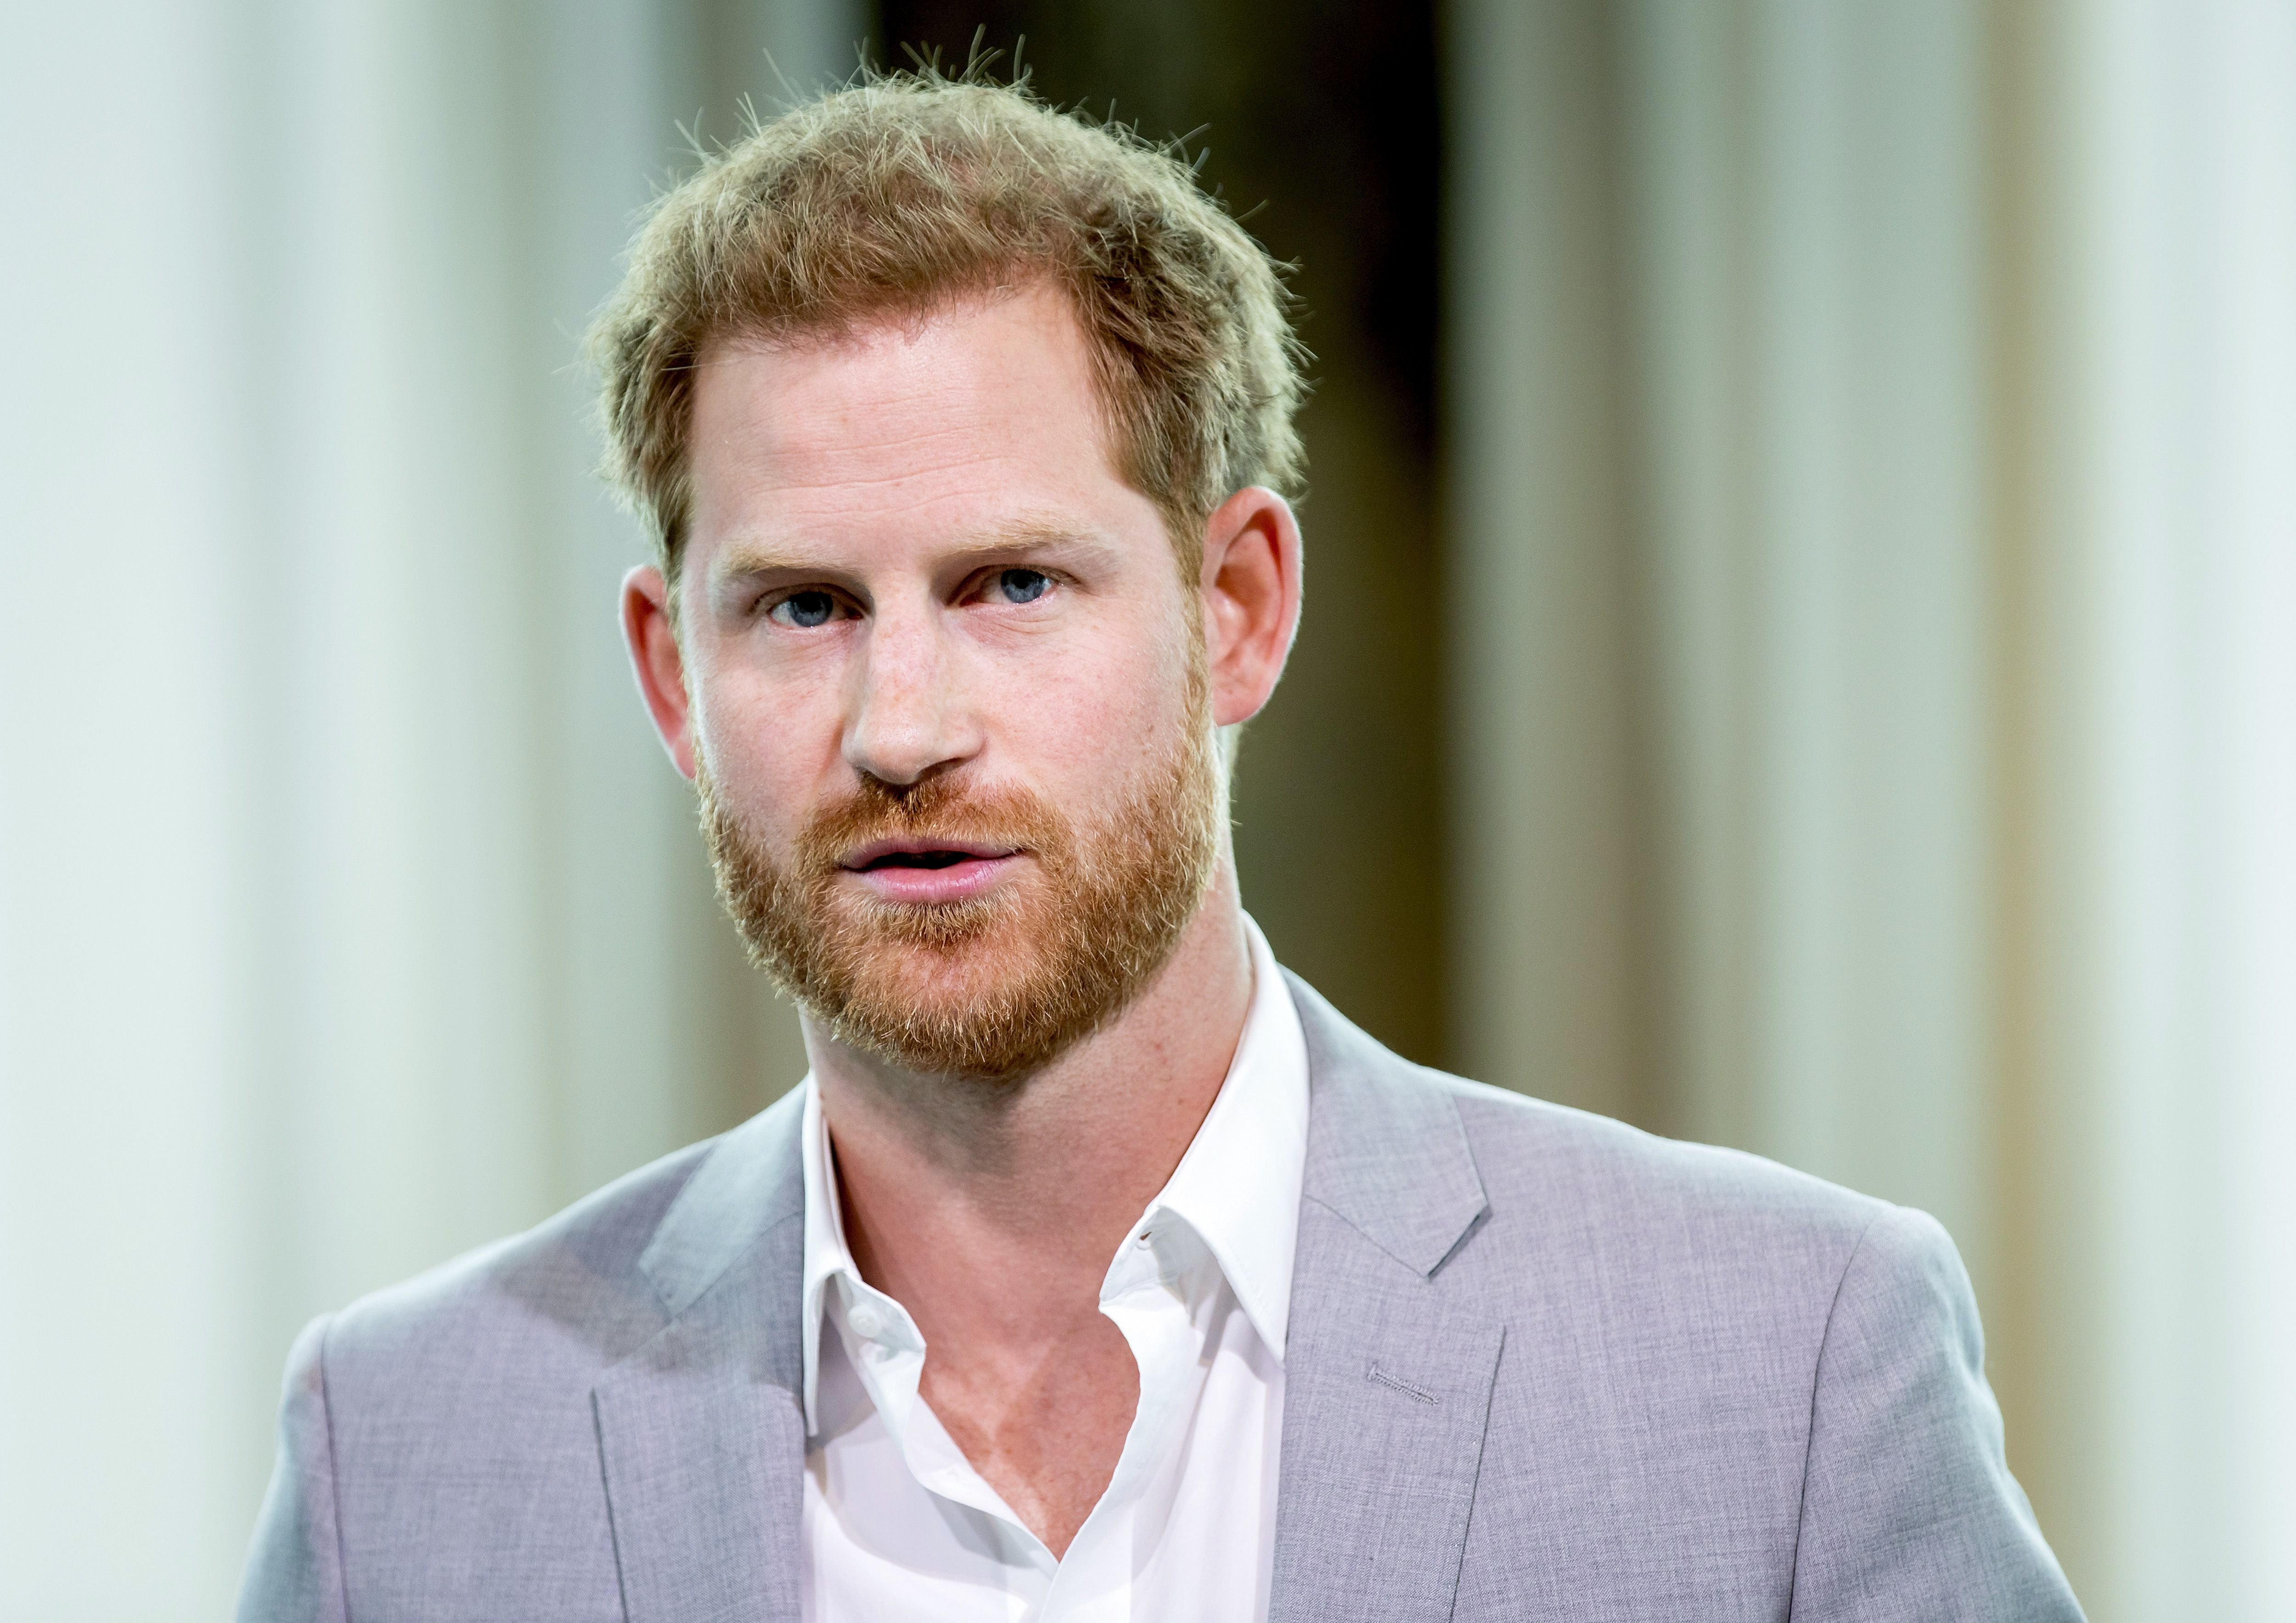 Prince Harry attending the Adam Tower project introduction and global partnership on September 3, 2019 in Amsterdam. / Source: Getty Images